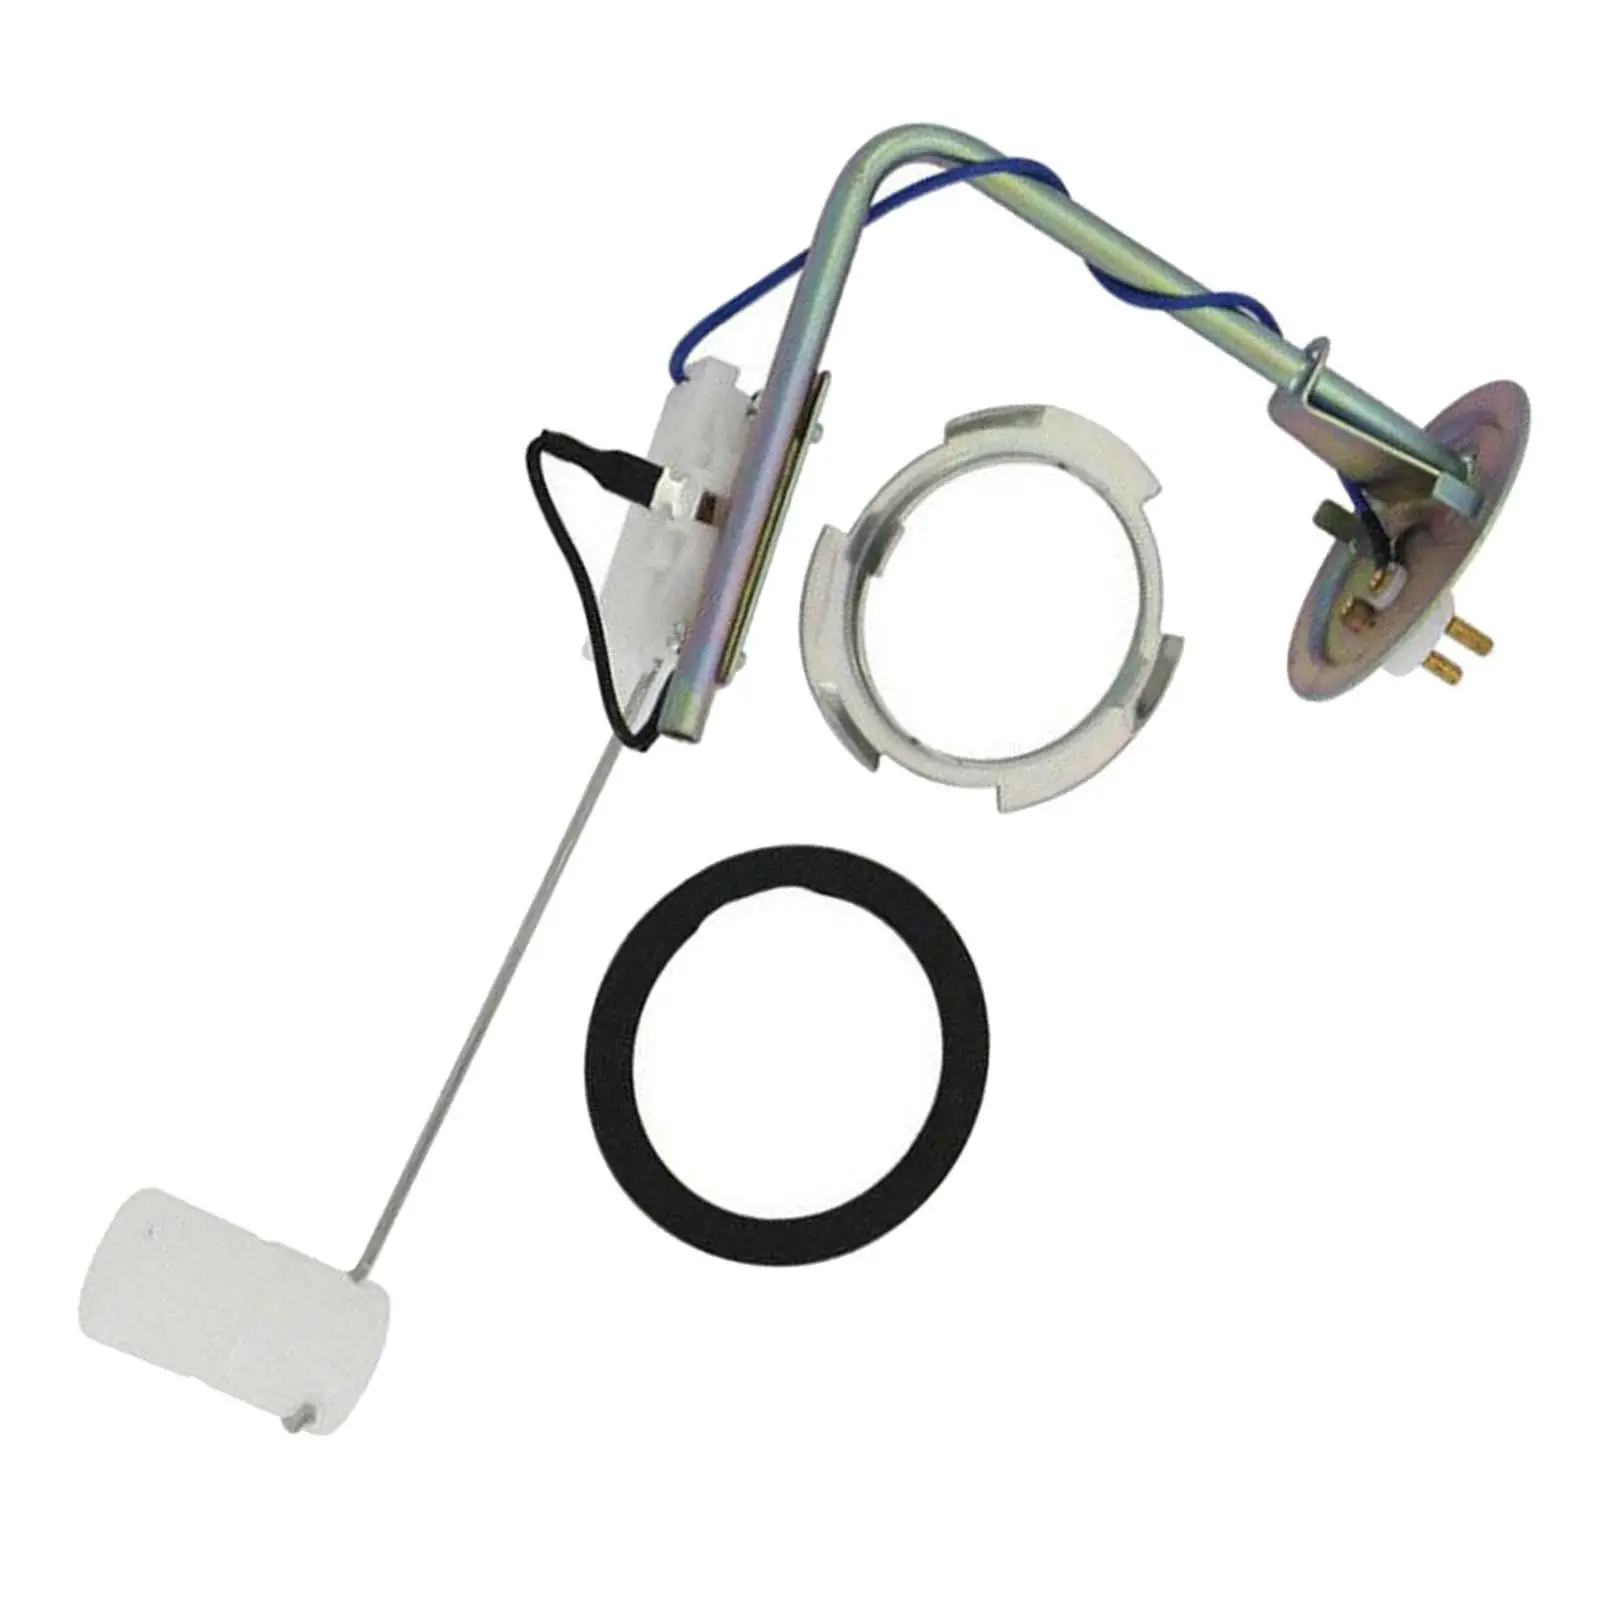 Fuel Pump Sender Easy Installation Repair Parts Replaces Professional E0LY-9275-b Assembly for Lincoln Mercury 1980-1989